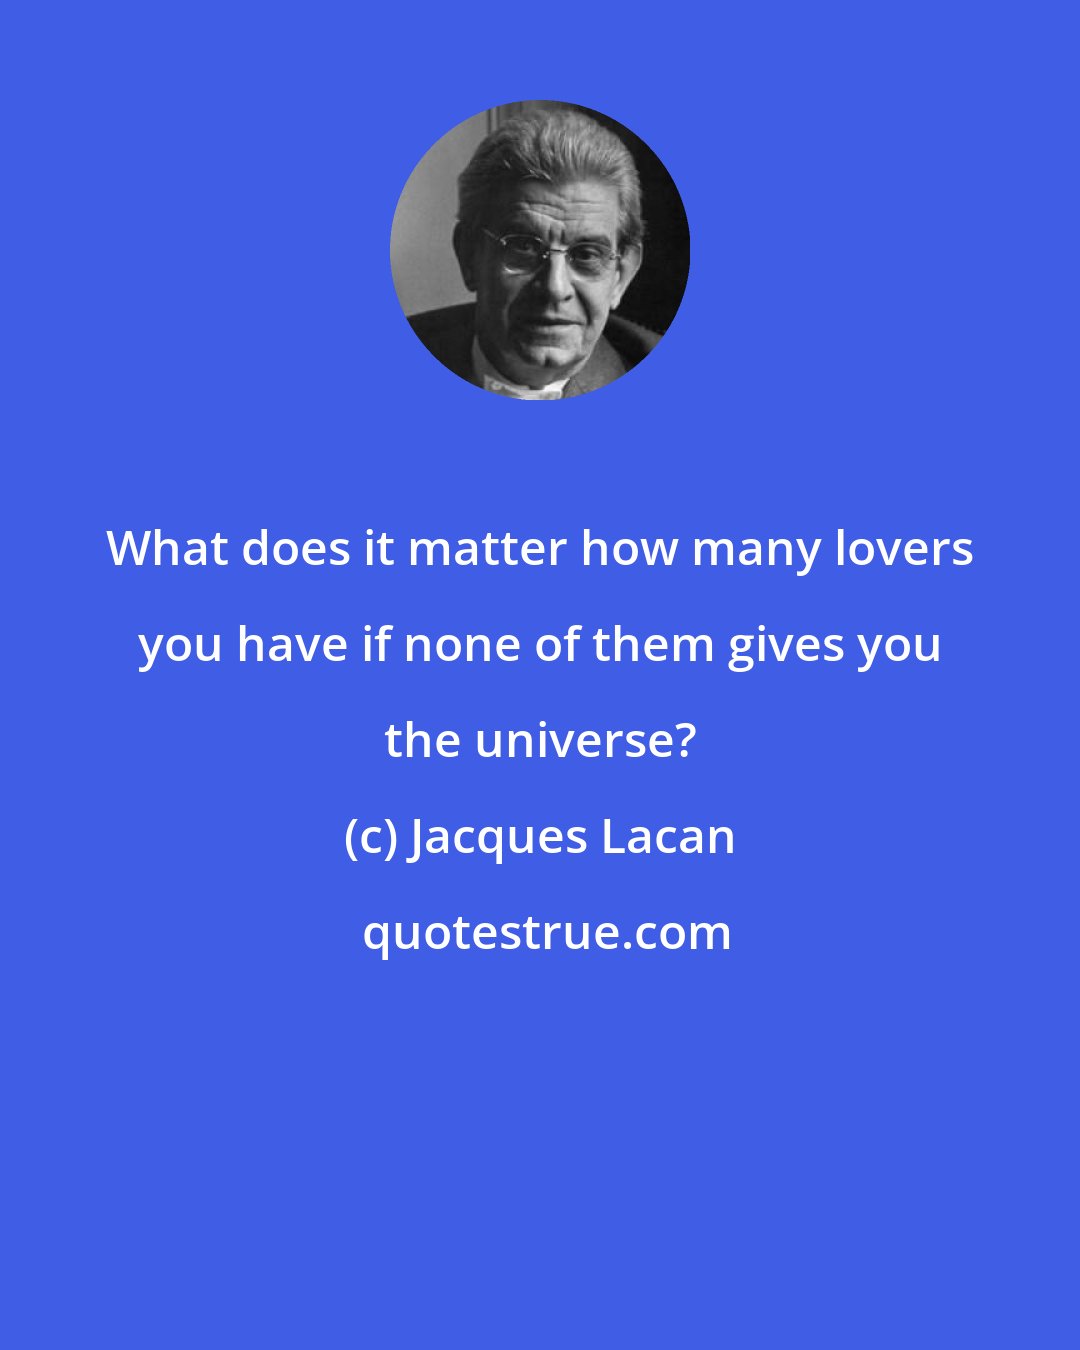 Jacques Lacan: What does it matter how many lovers you have if none of them gives you the universe?